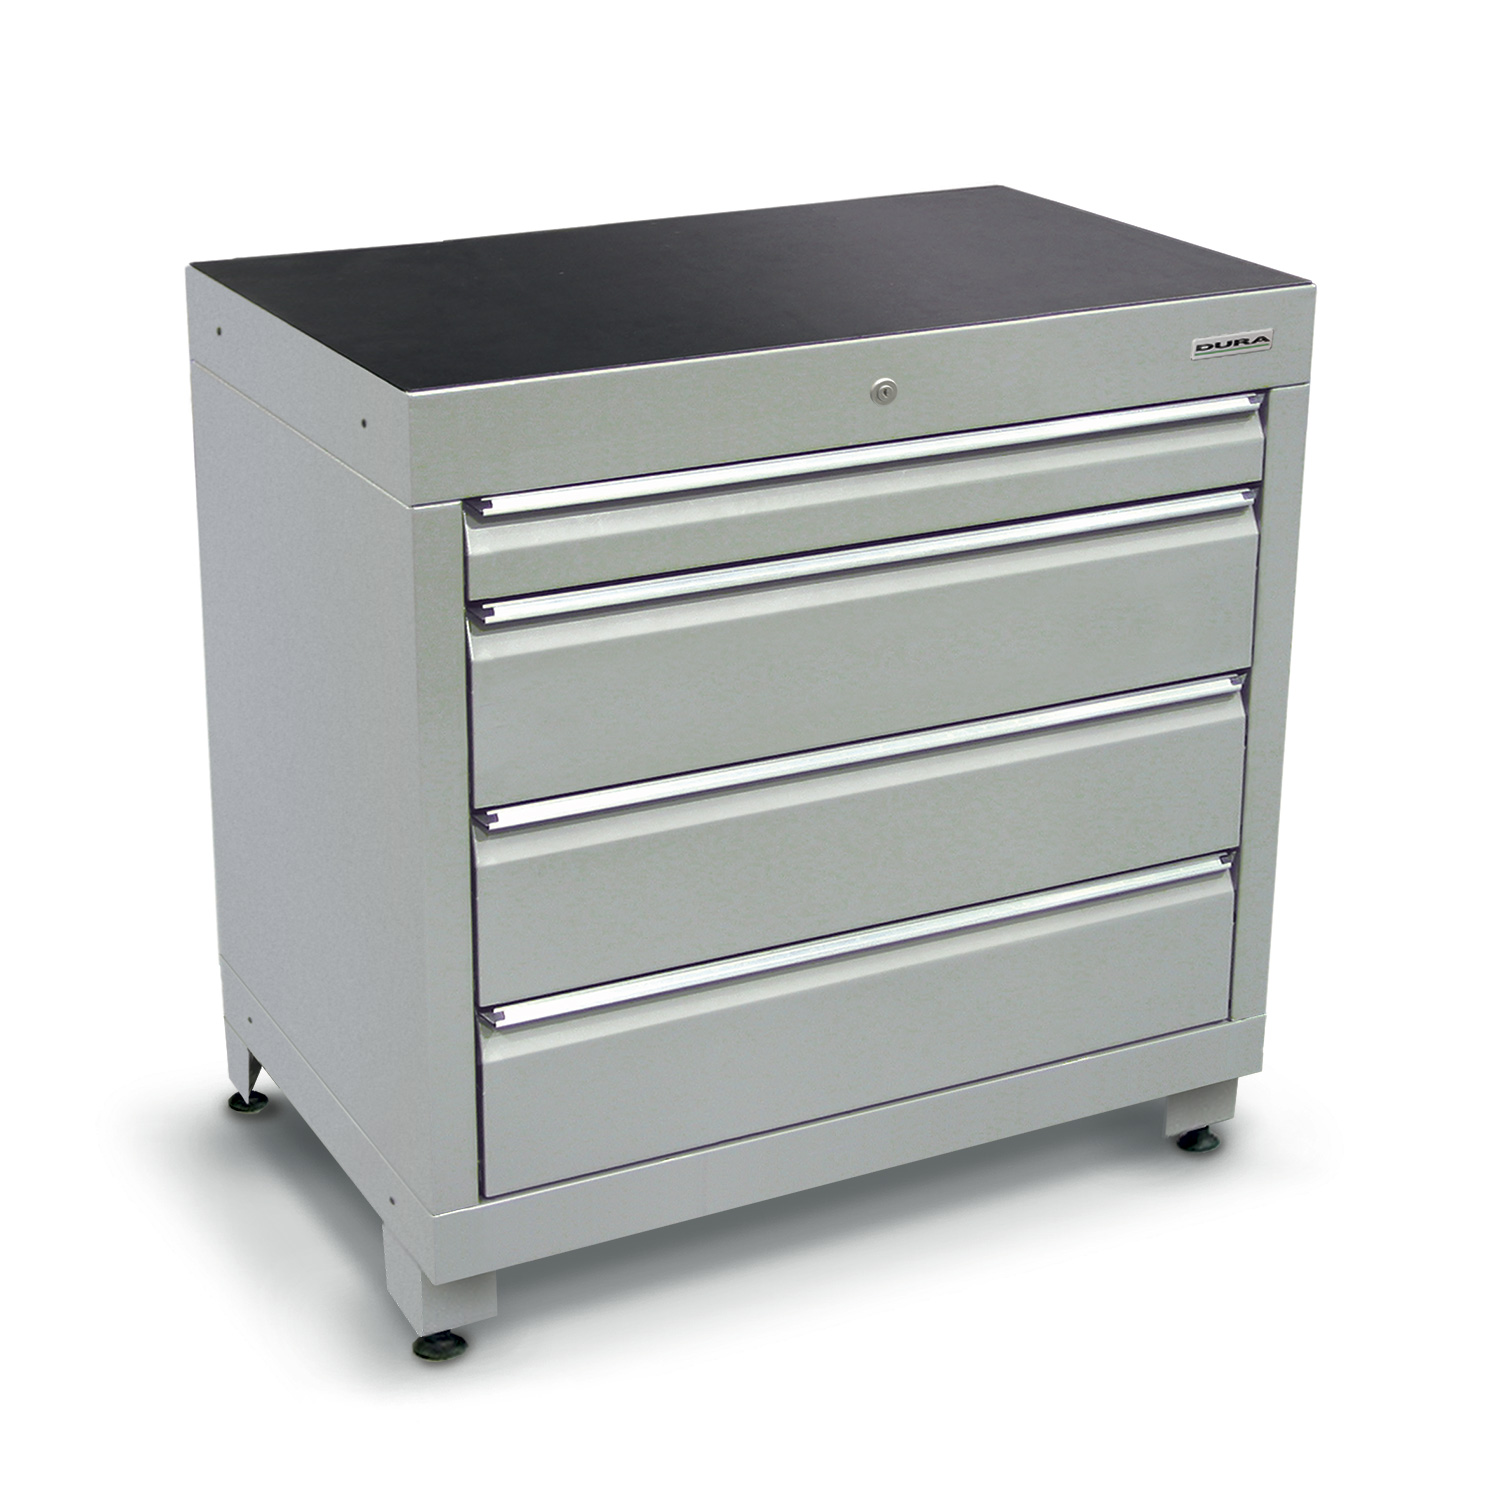 900 series cabinet with 4 drawers (1 medium, 3 large) and feet